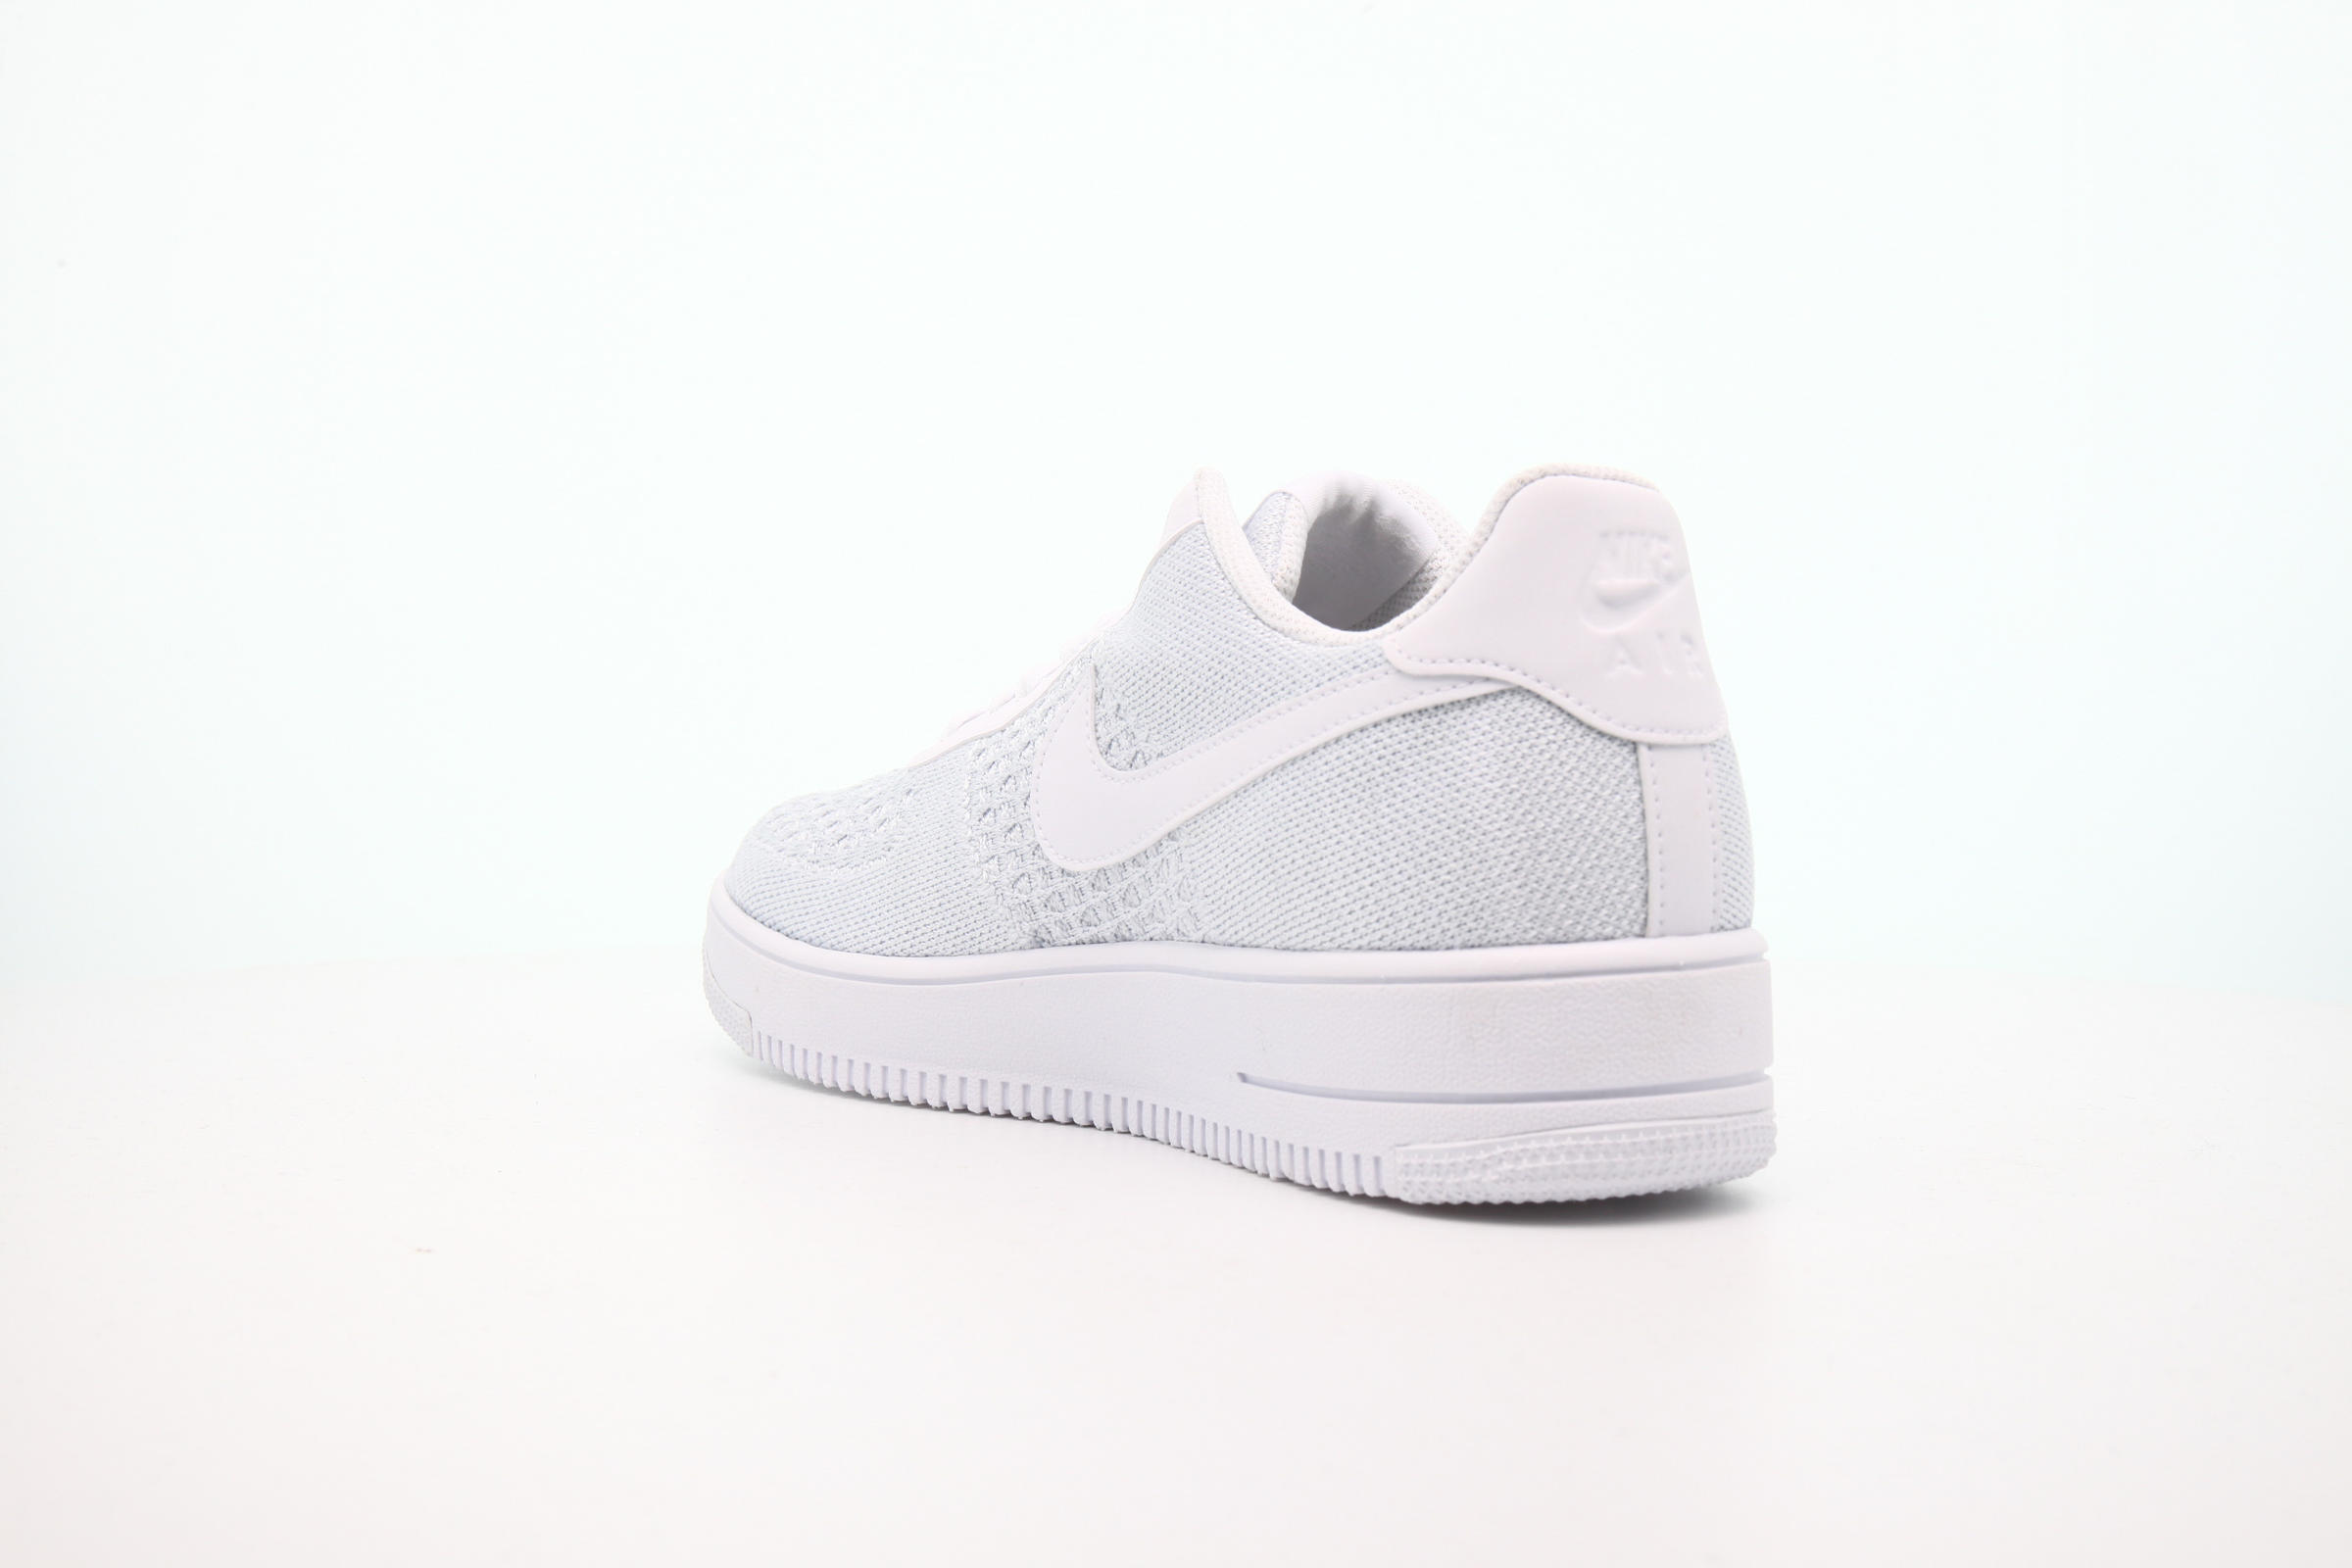 Nike AIR FORCE 1 FLYKNIT 2.0 "WHITE"